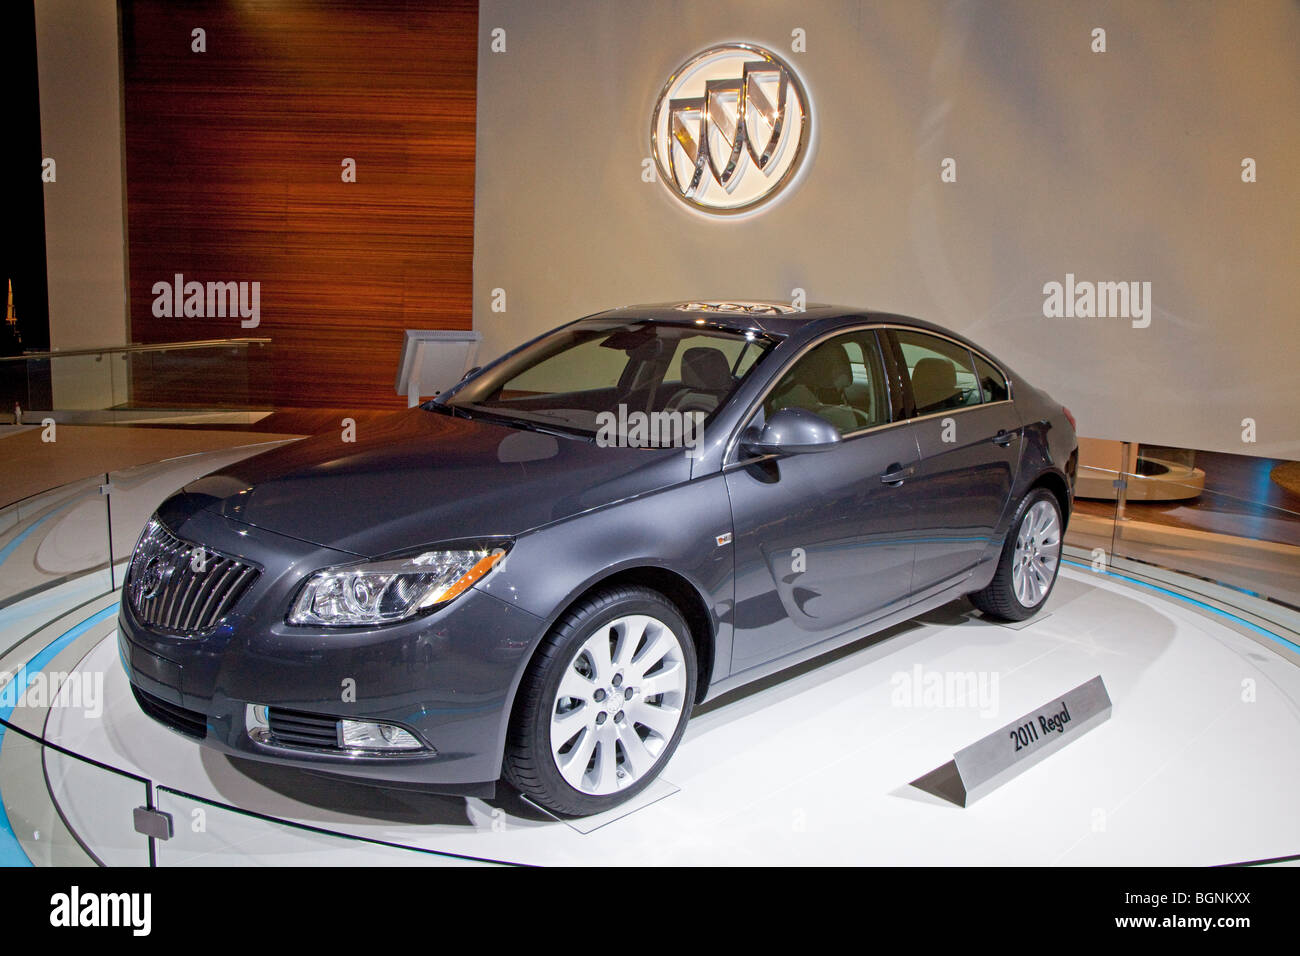 Detroit, Michigan - The 2011 Buick Regal on display at the 2010 North American International Auto Show. Stock Photo